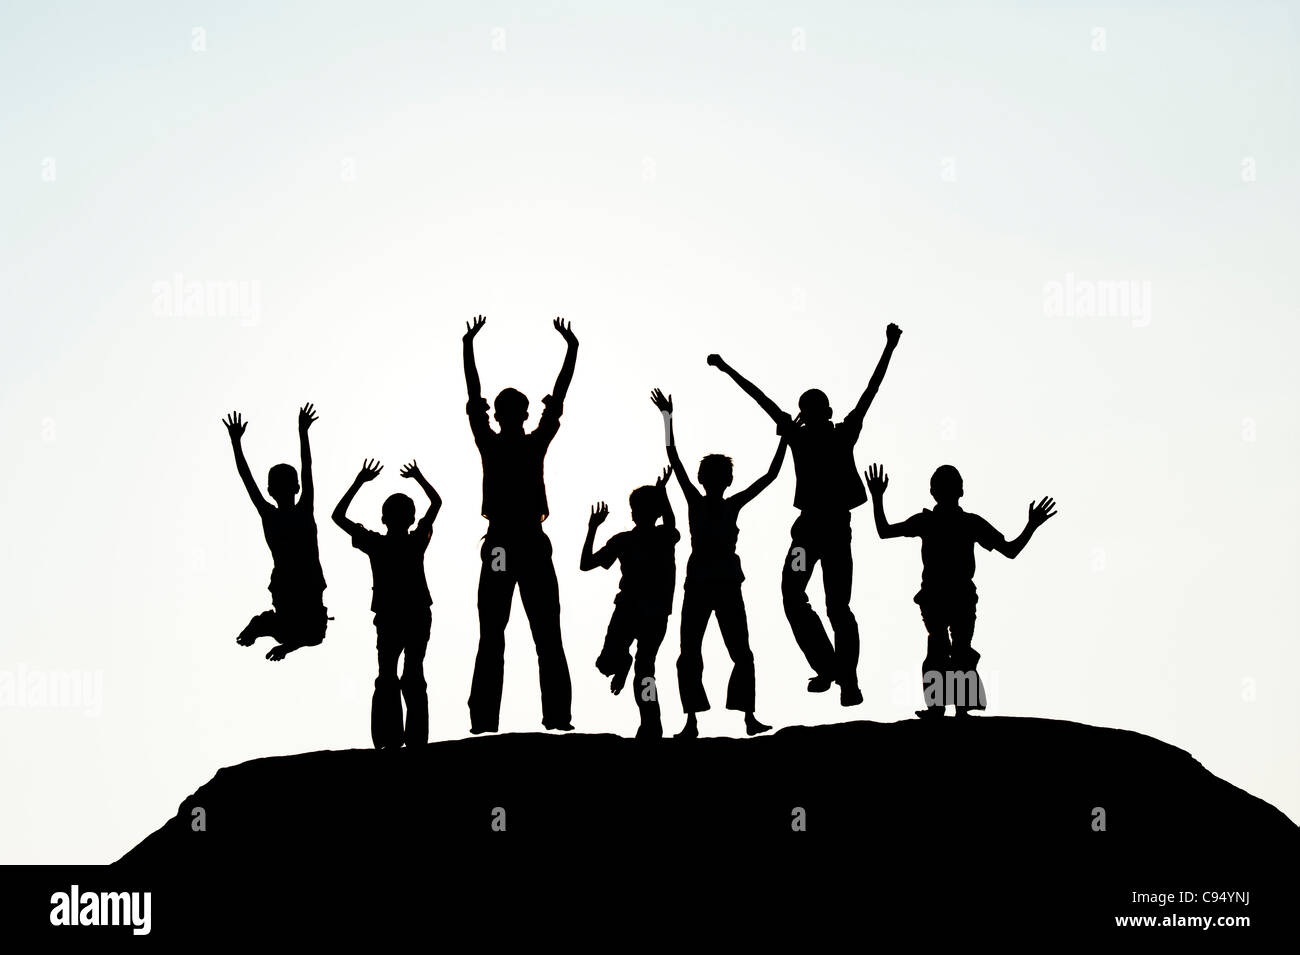 Silhouette of young Indian boys jumping on a rock against the sun / light sky Stock Photo